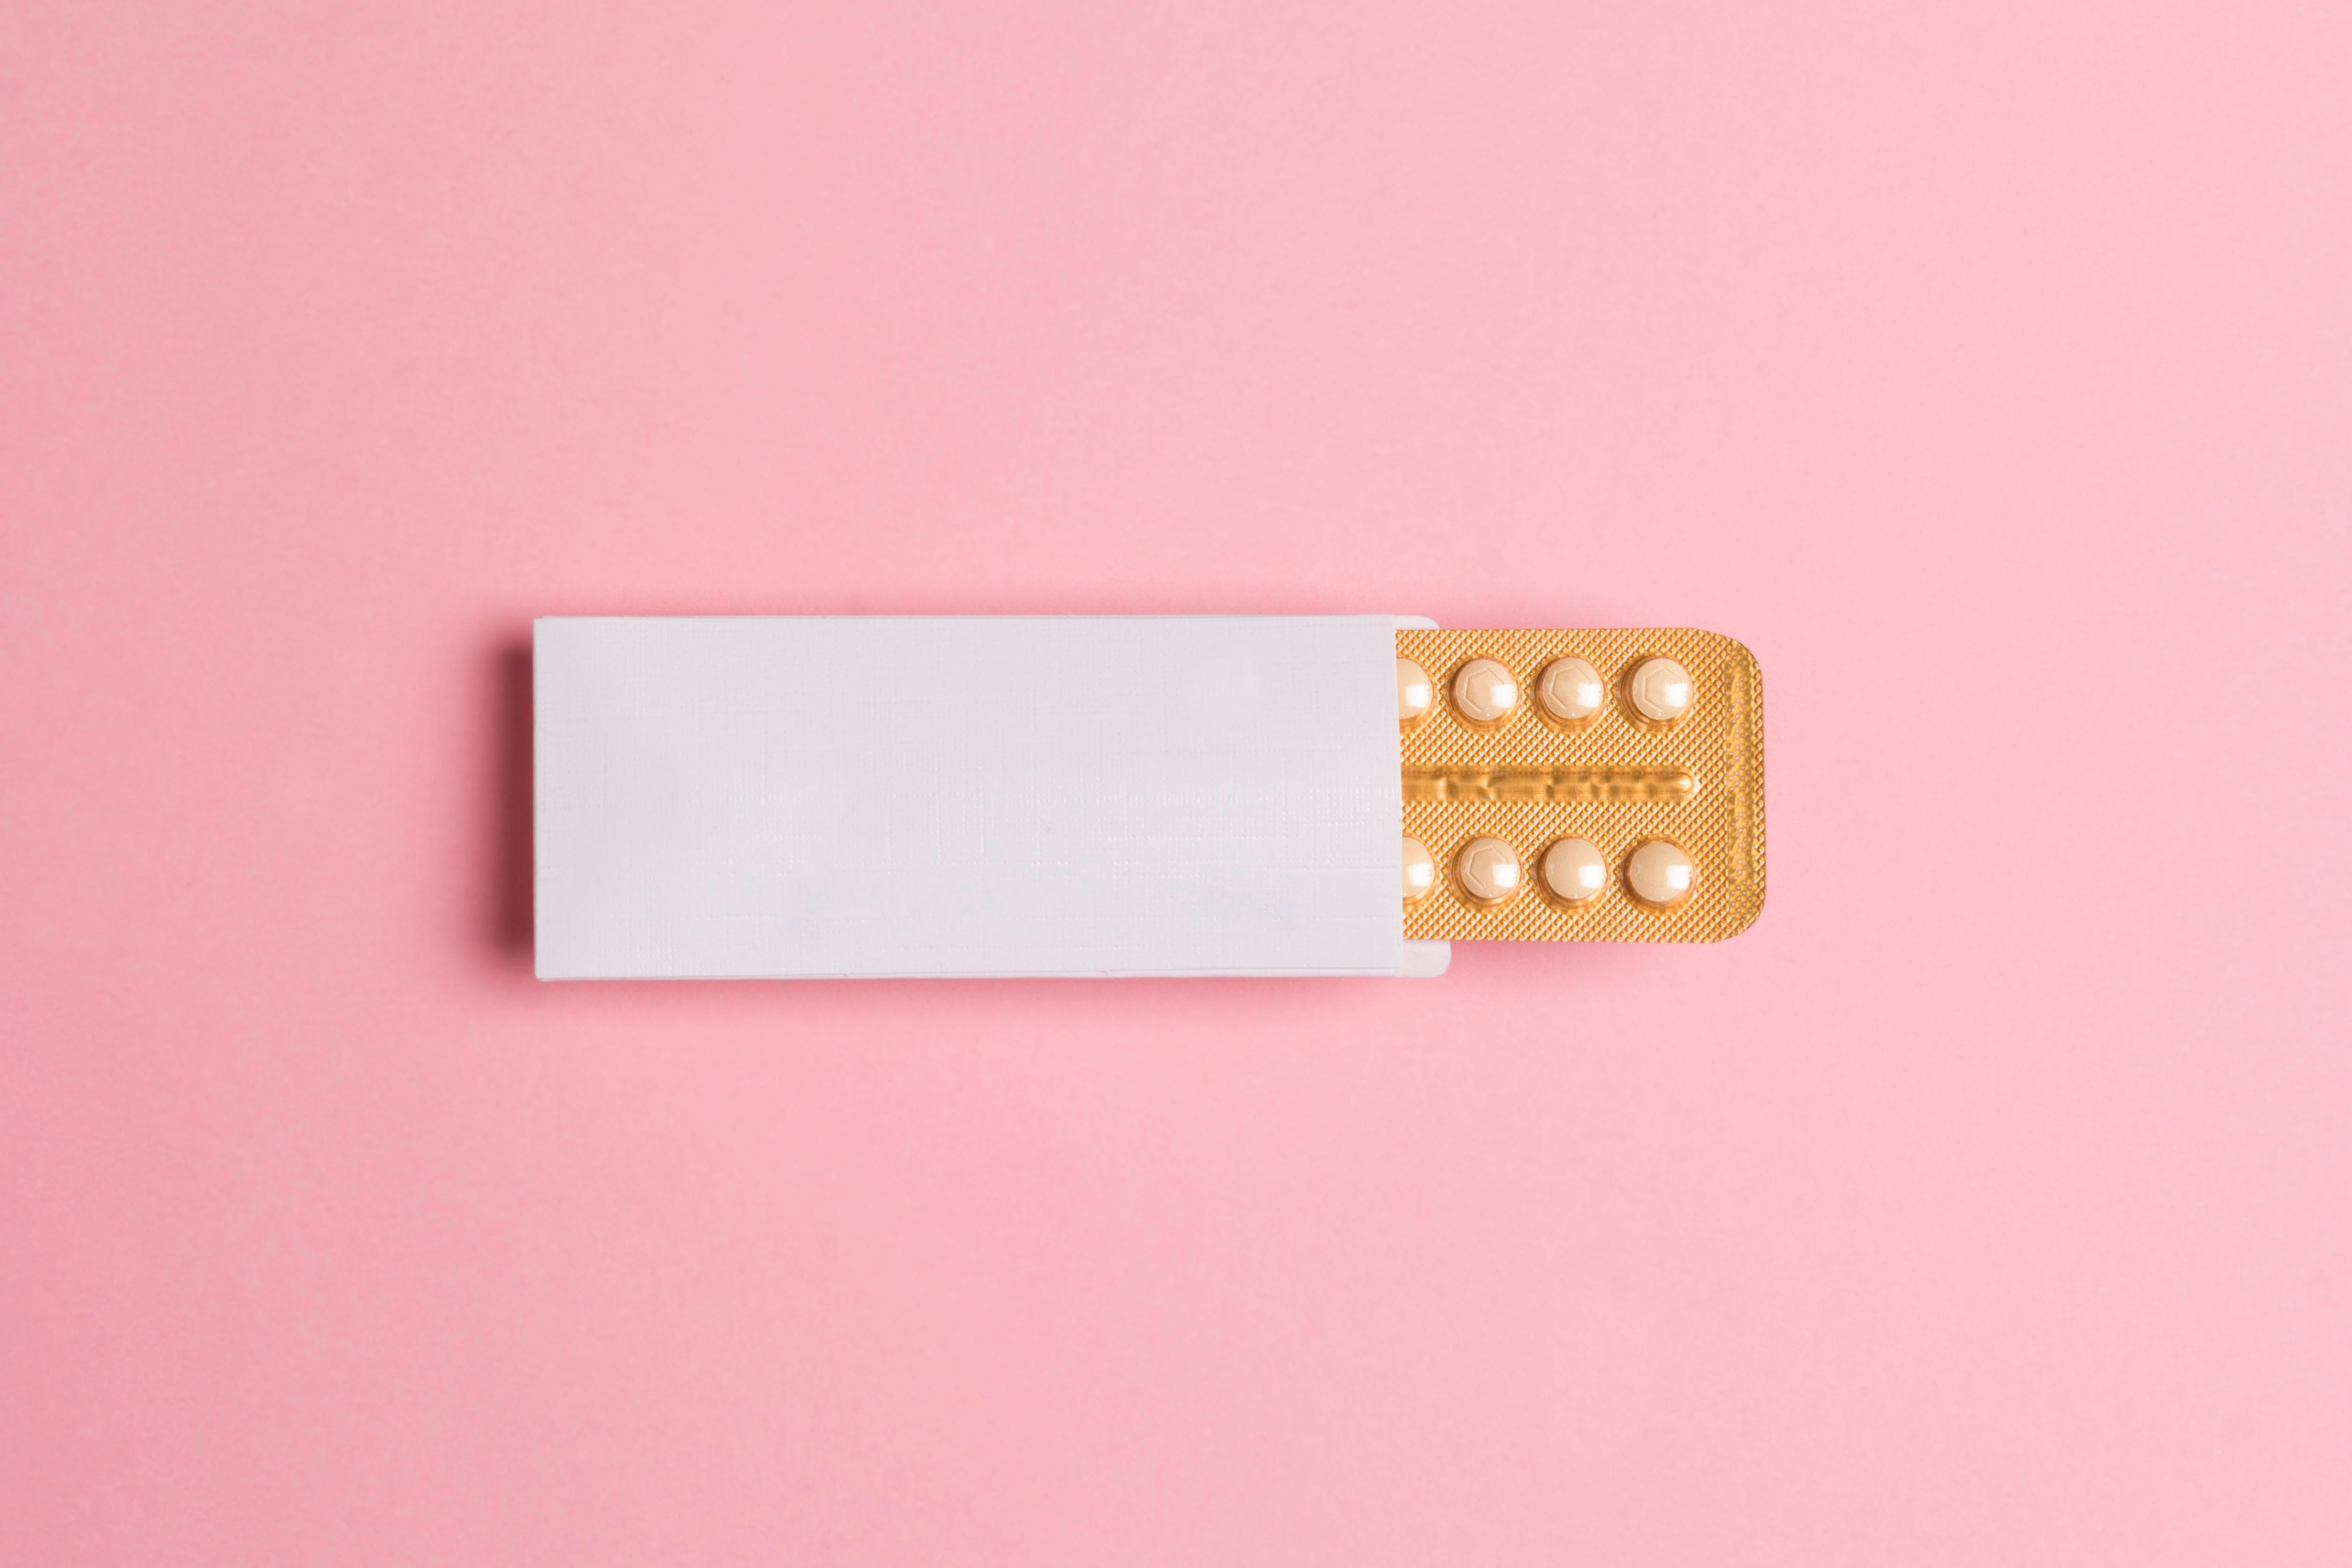 Massachusetts policy improves access to emergency contraception